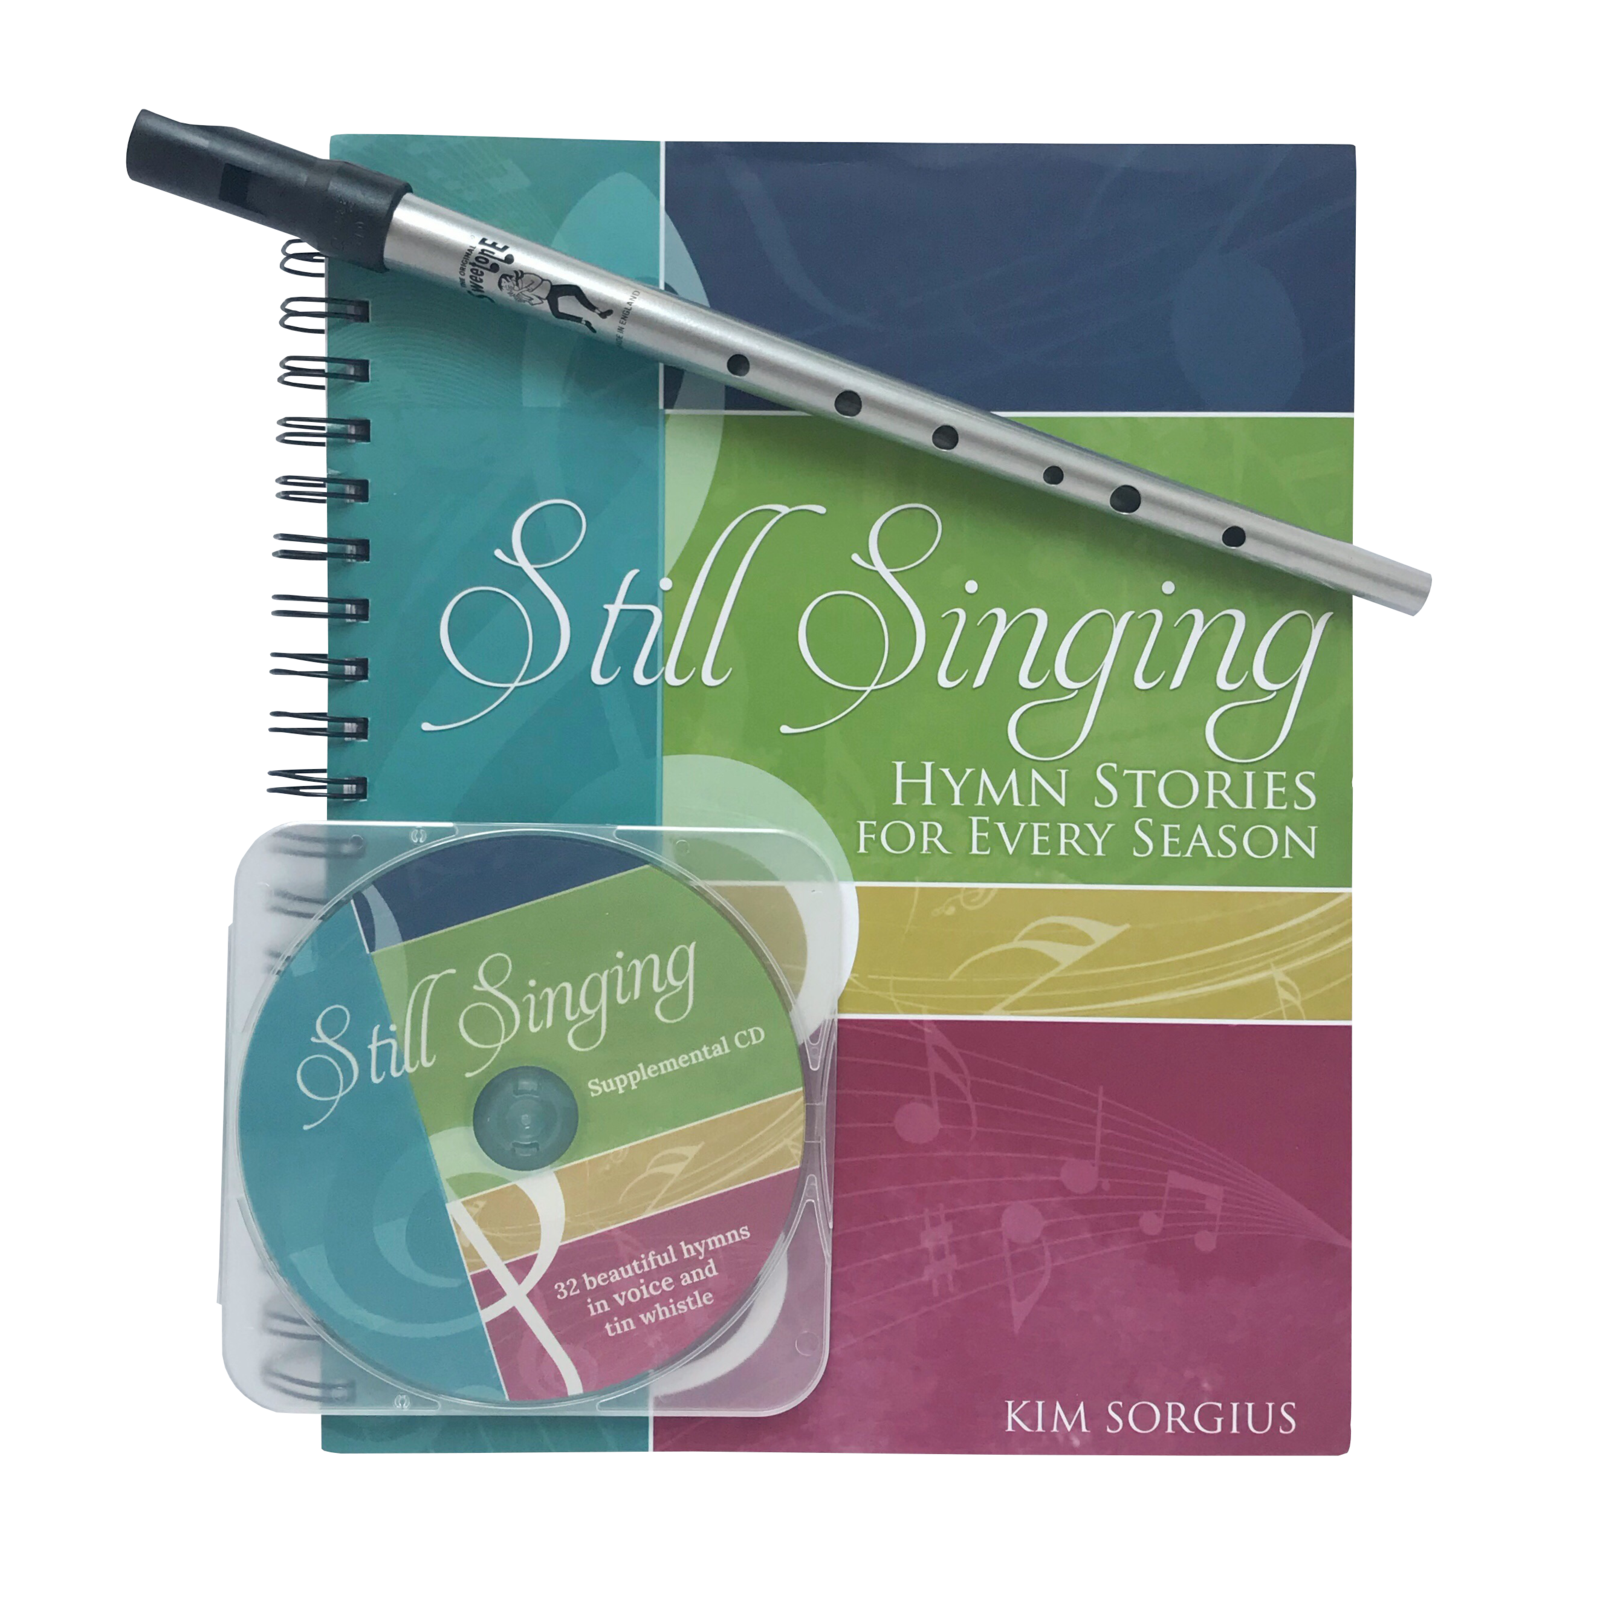 Still Singing: Hymn Stories for Every Season curriculum for kids to learn about hymns, as well as learn to play and sing them. #hymnstudy #musicinourhomeschool #elementarymusic #homeschoolmusic